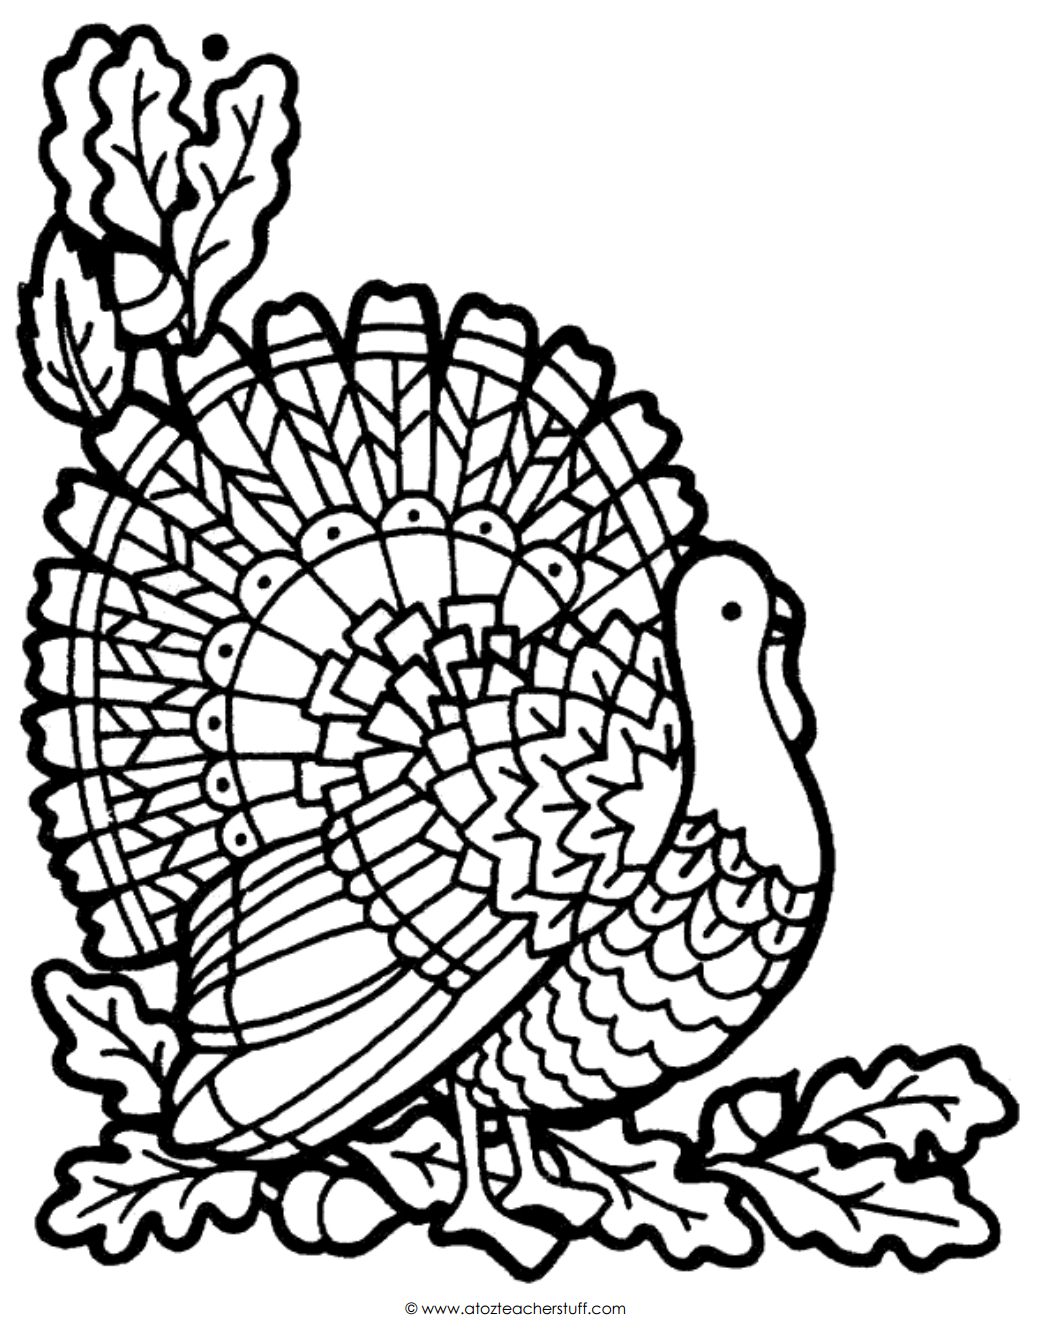 Turkey Coloring Page | A To Z Teacher Stuff Printable Pages And - Free Printable Pictures Of Turkeys To Color